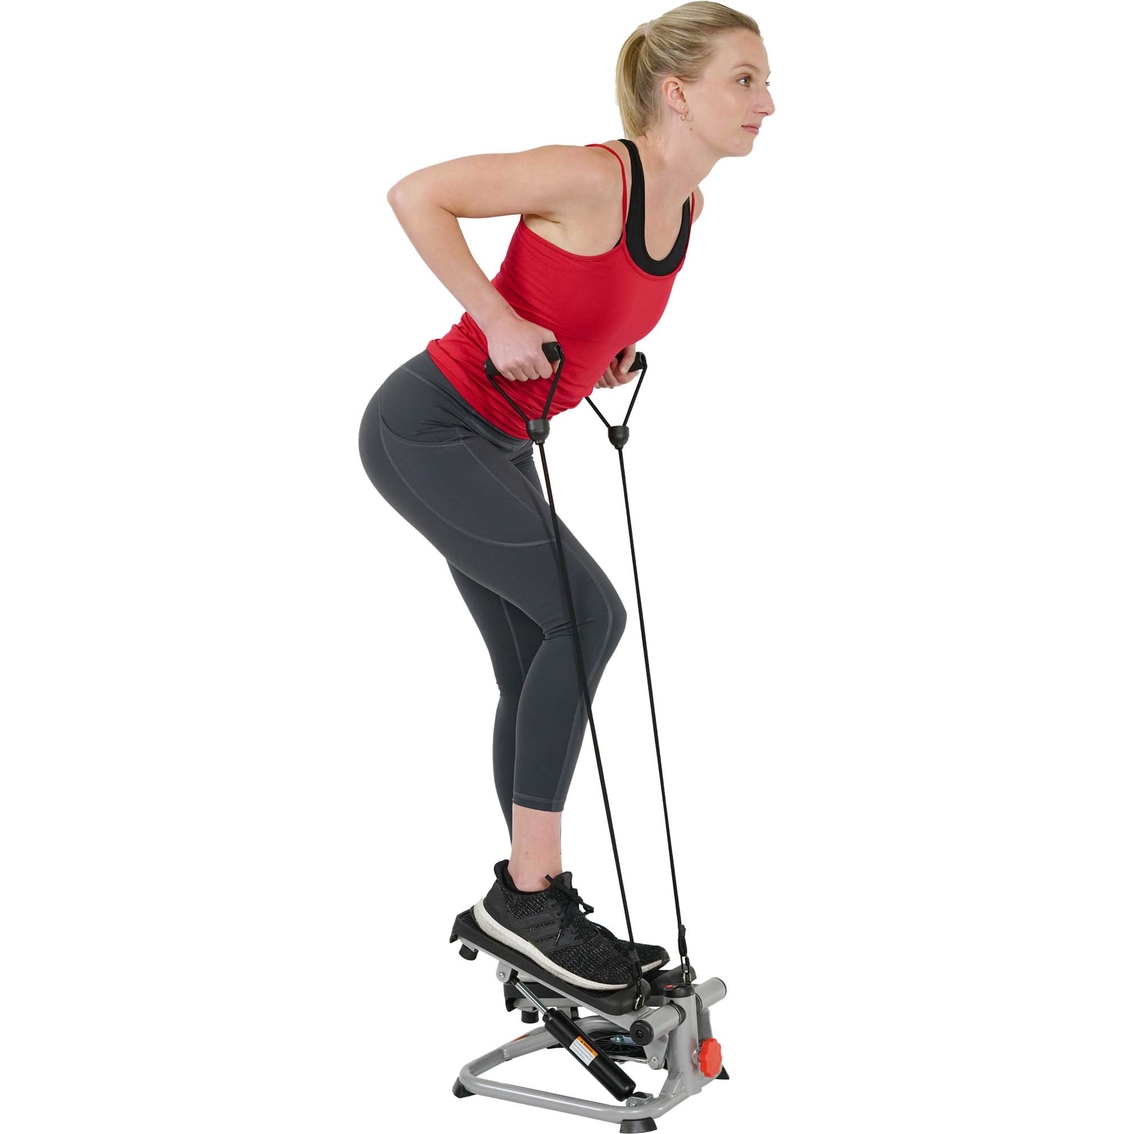 Sunny Health & Fitness Total Body Stepper Machine - Image 4 of 4